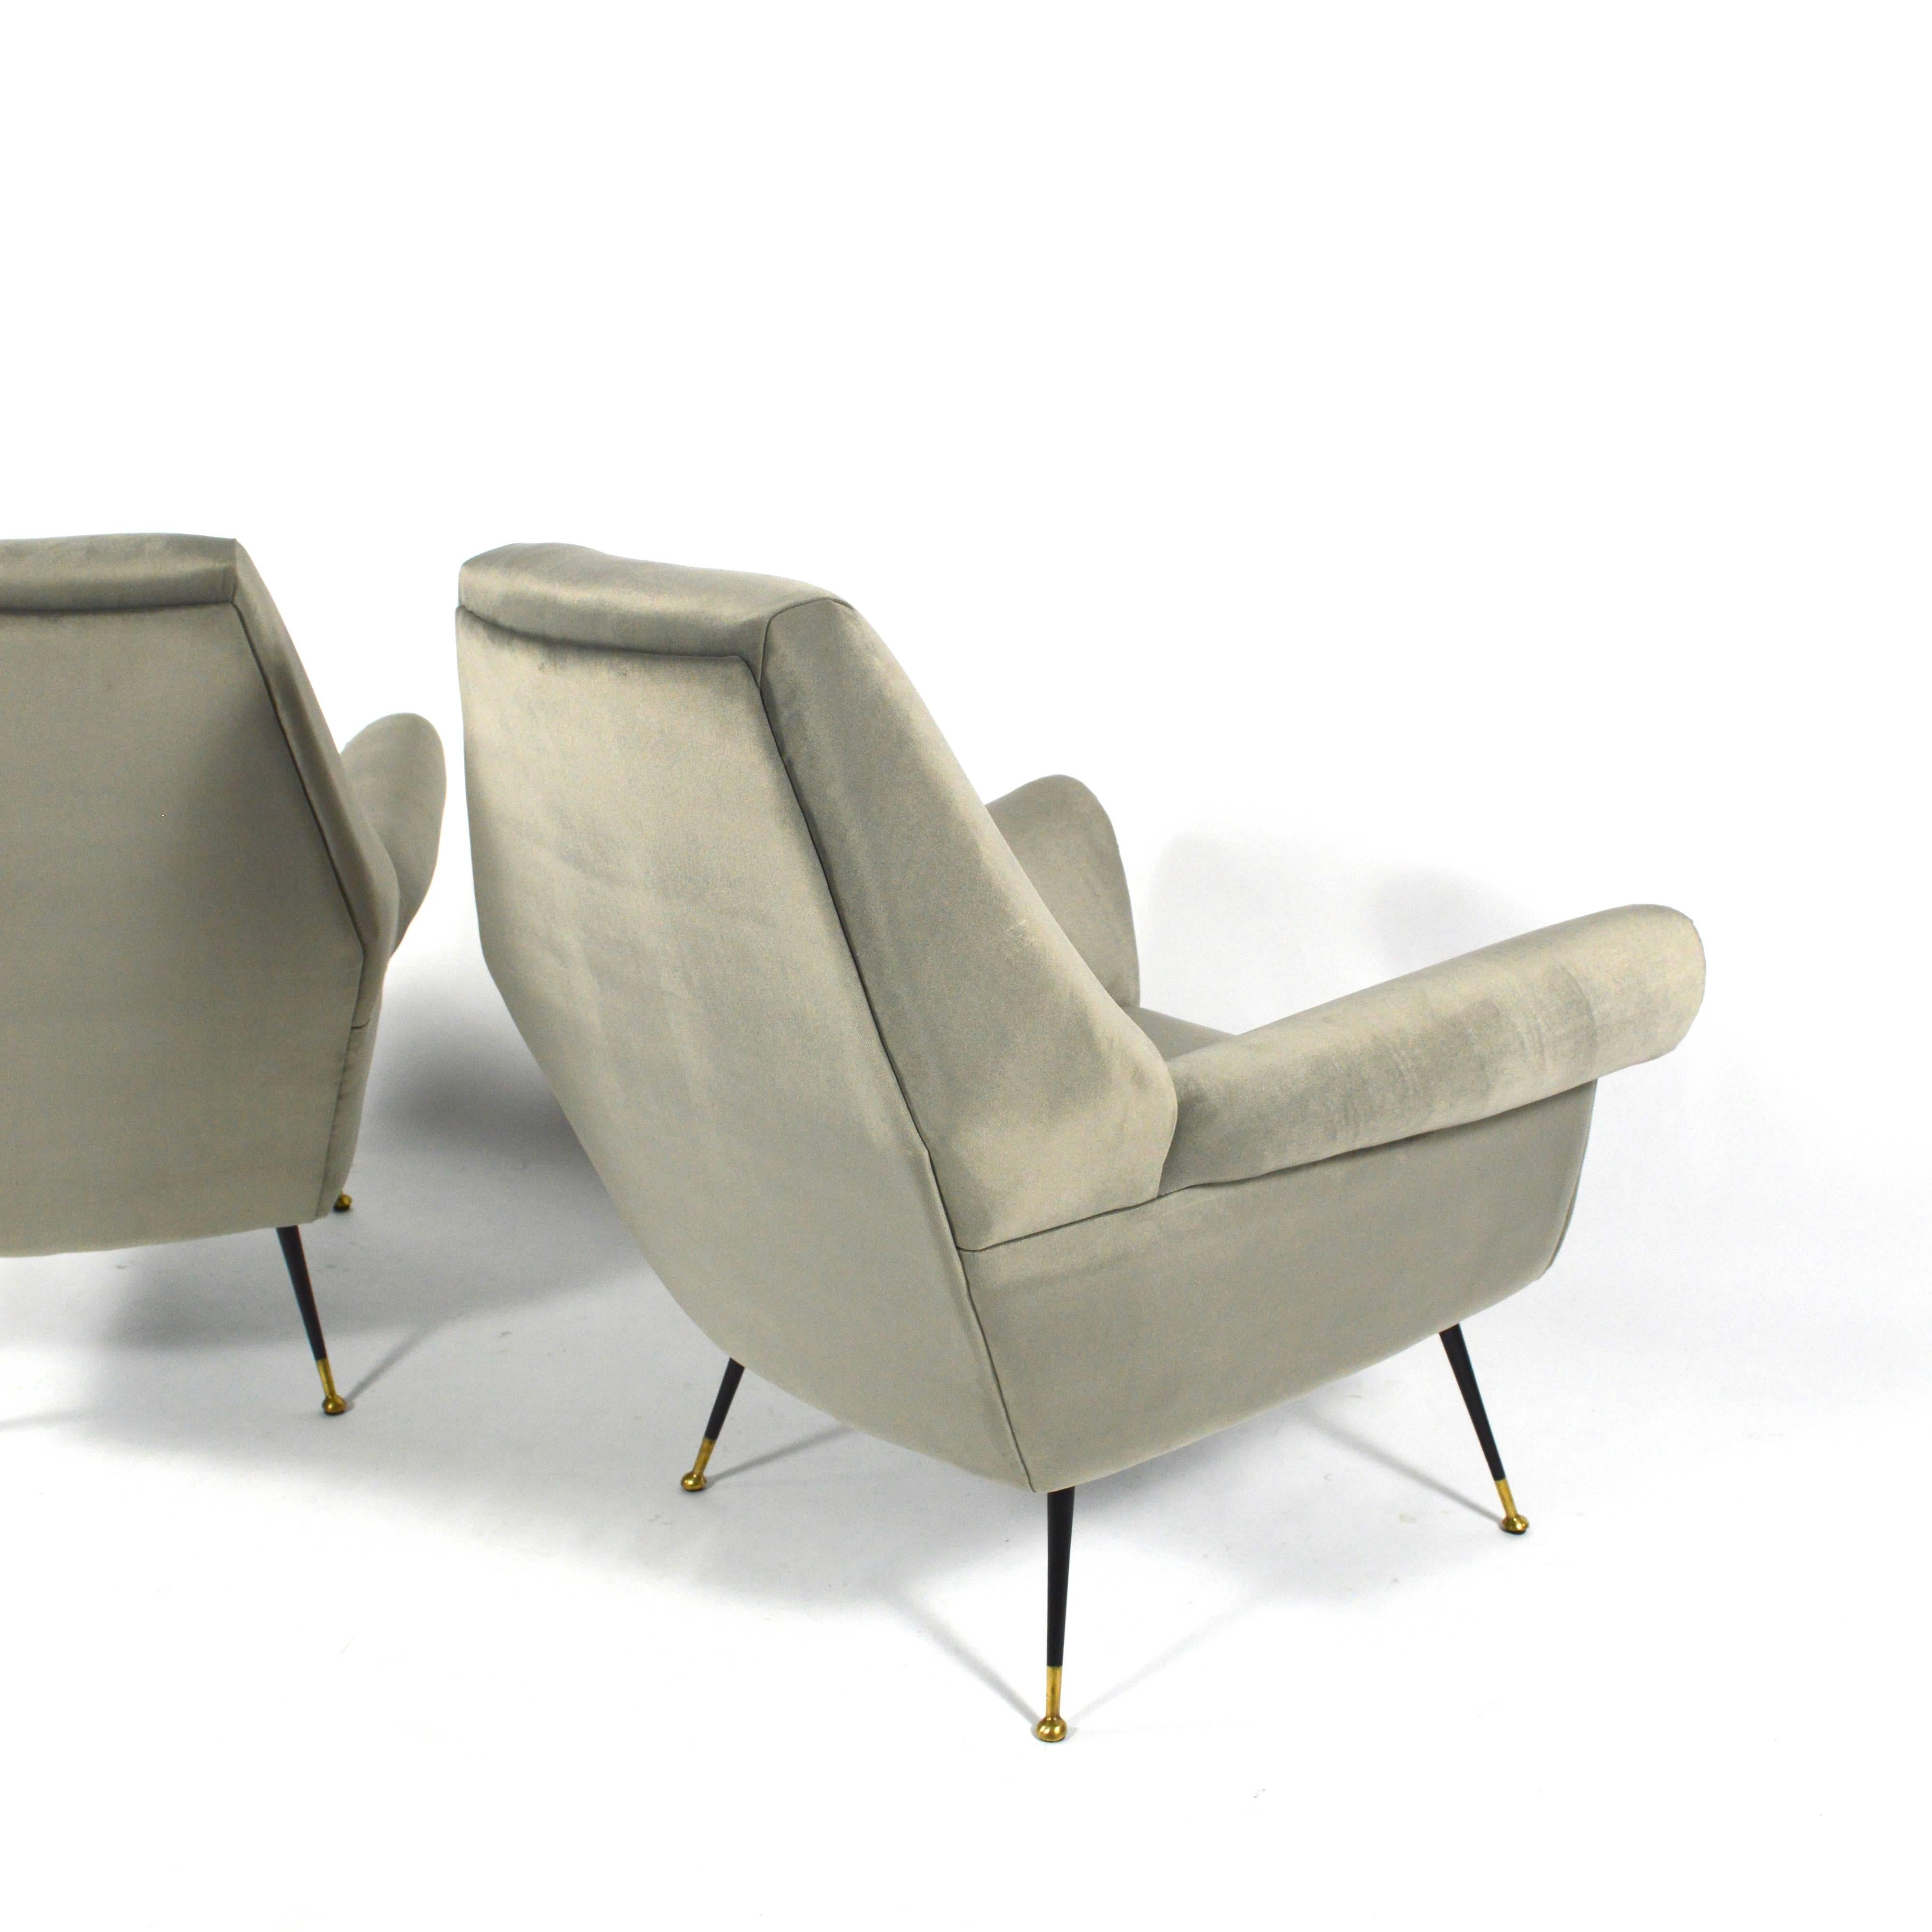 Gigi Radice Attributed Club Lounge Chairs, Italy, 1950s In Excellent Condition In Pijnacker, Zuid-Holland